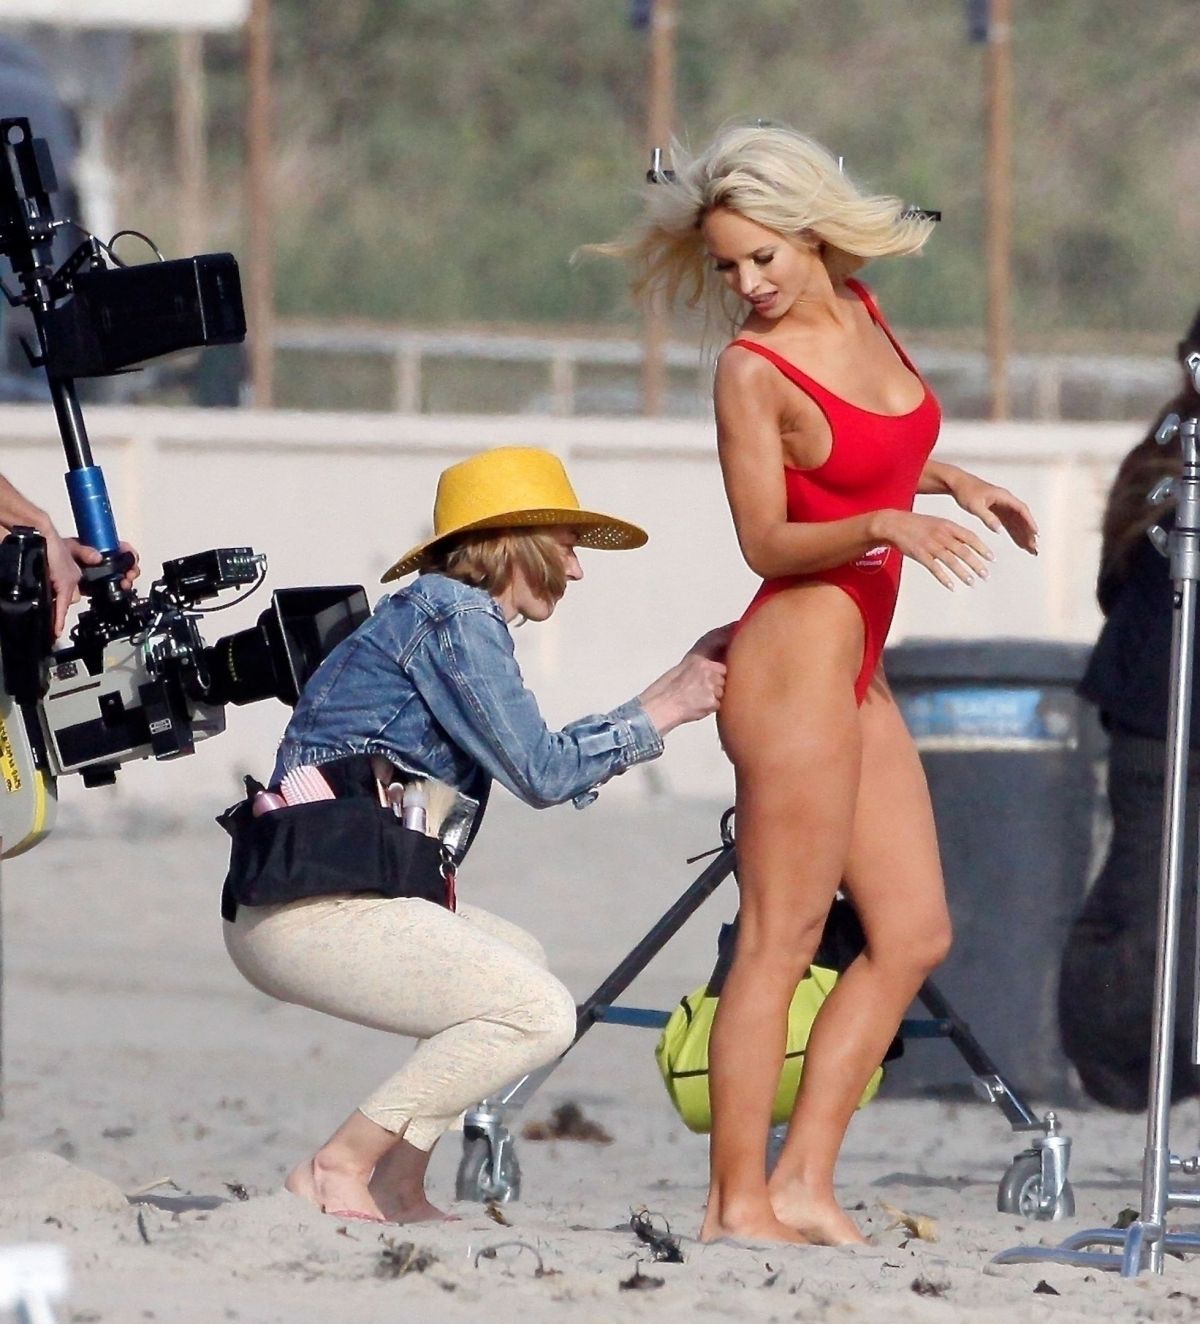 LILY JAMES In Swimsuit As Pam Anderson On The Set Of Pam And Tommy At A Beach In Malibu